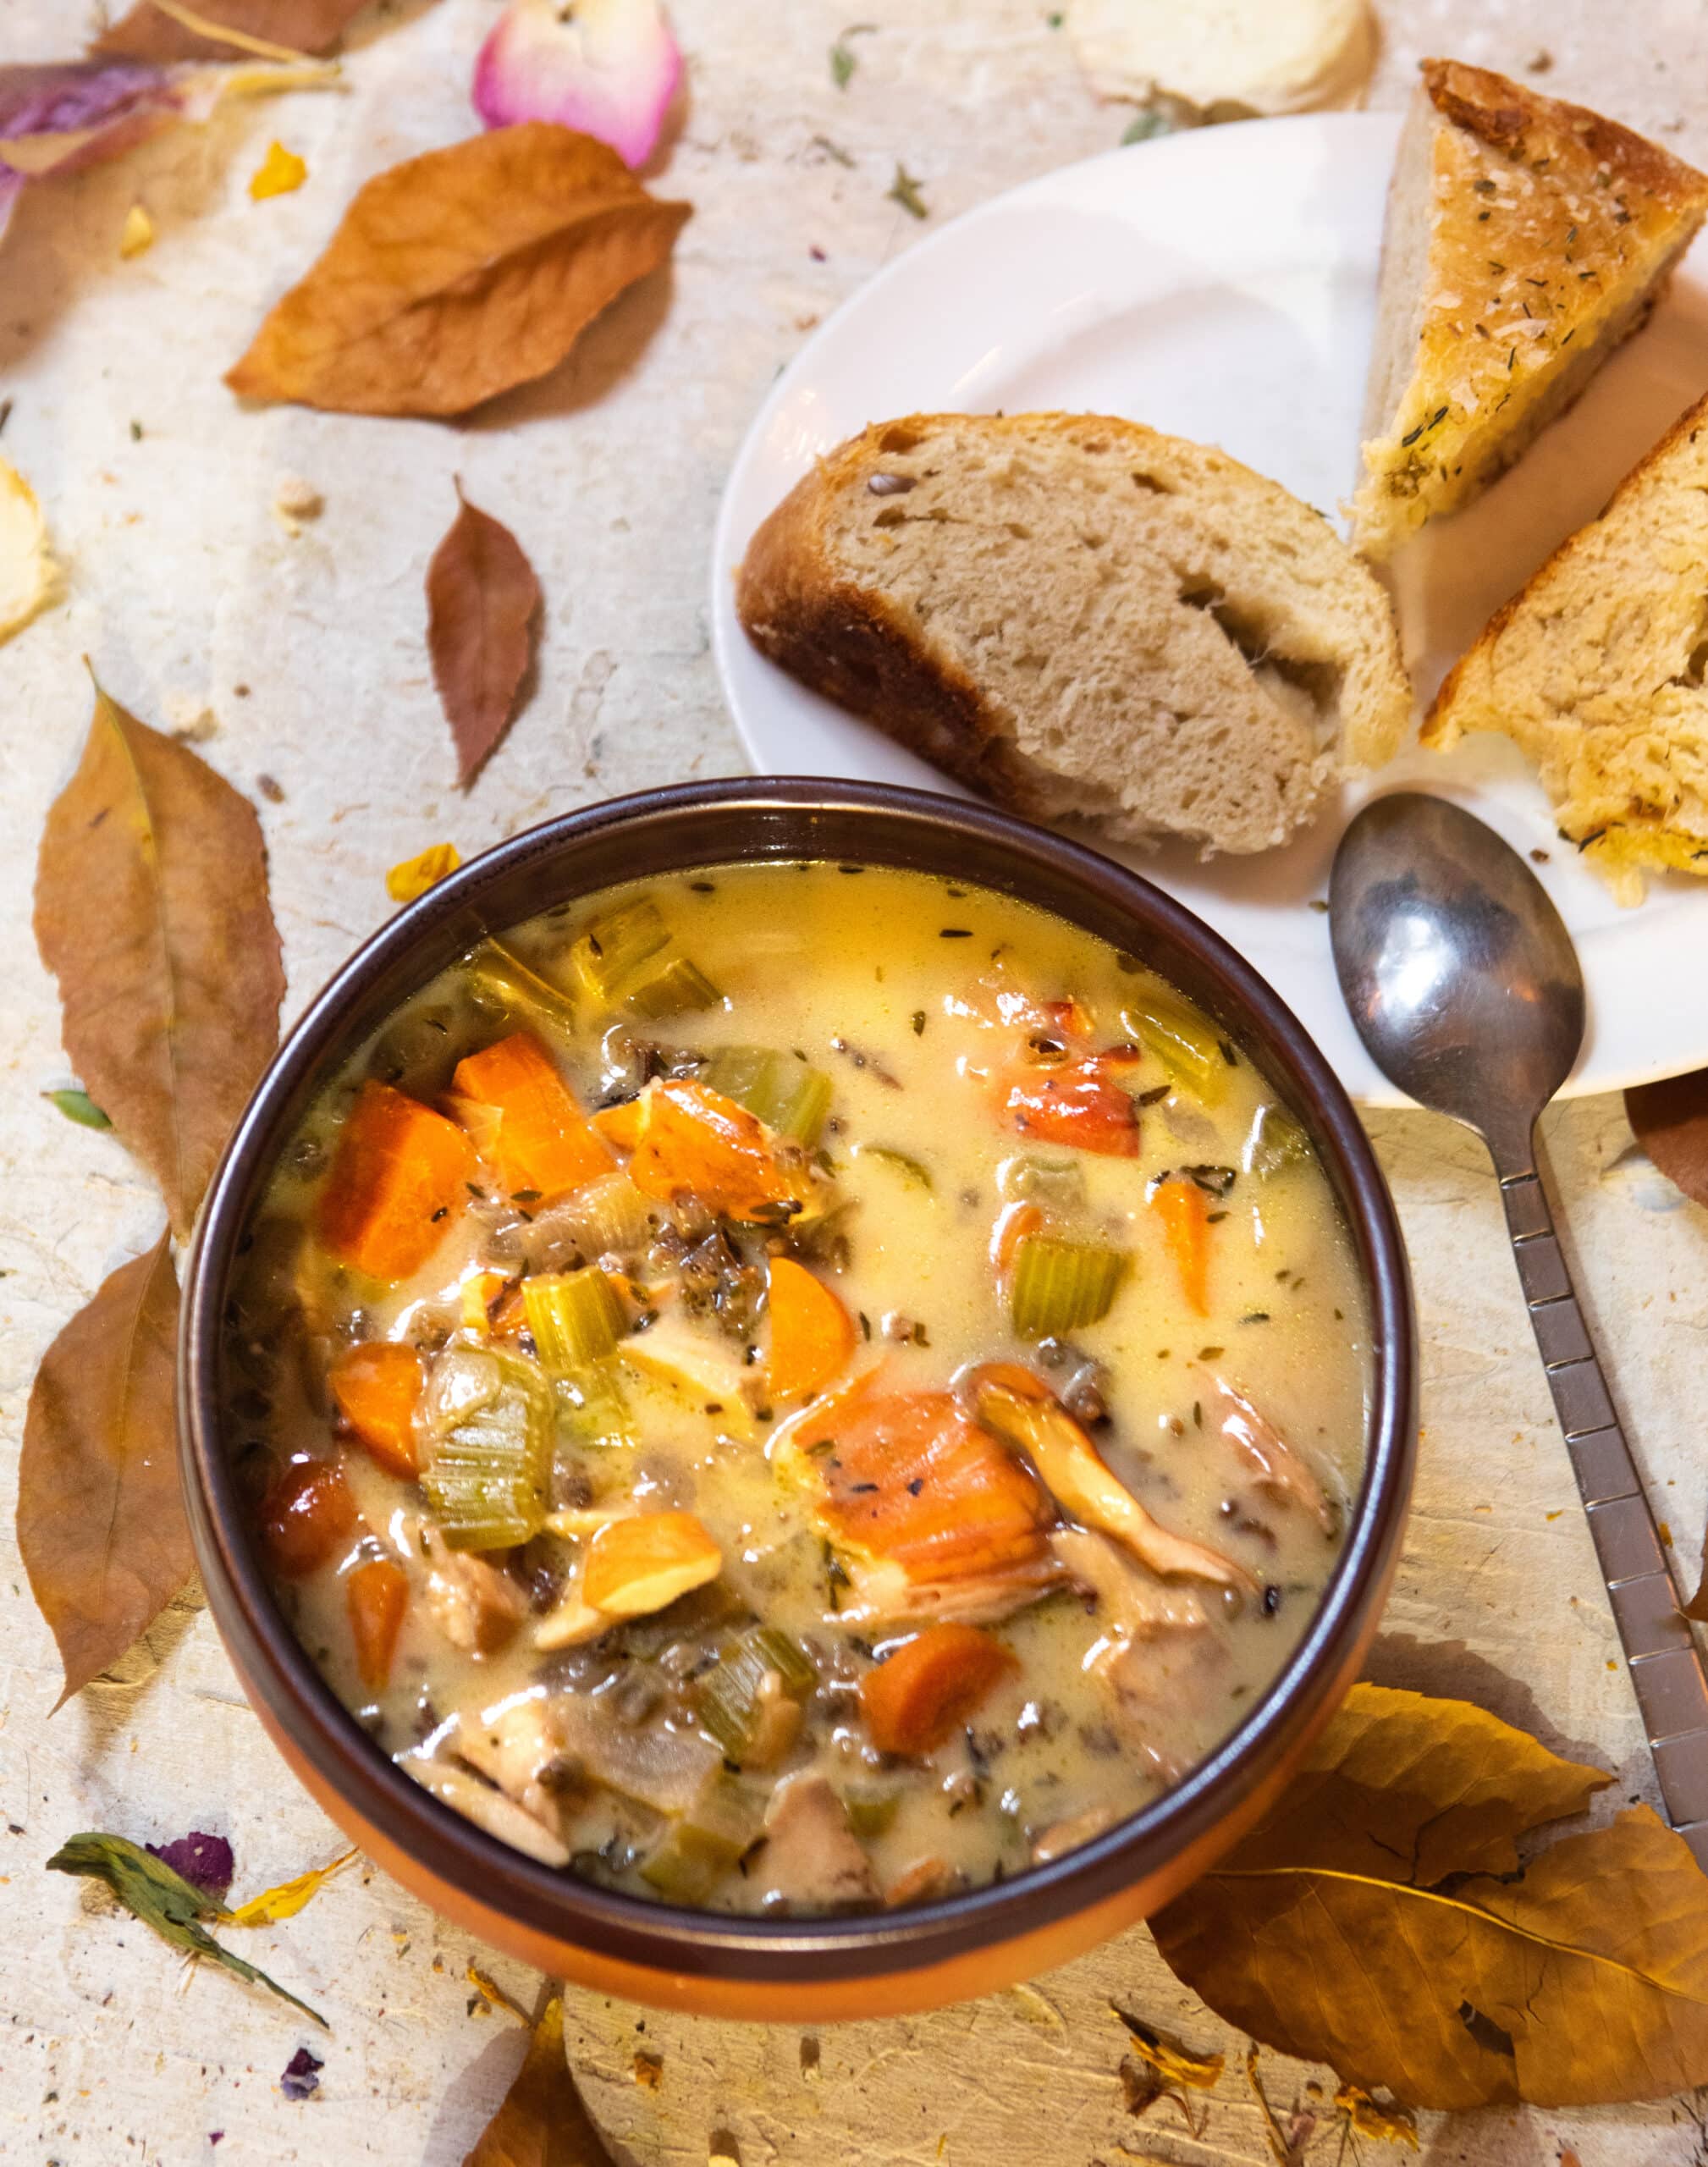 CHICKEN OF THE WOODS RECIPE SOUP